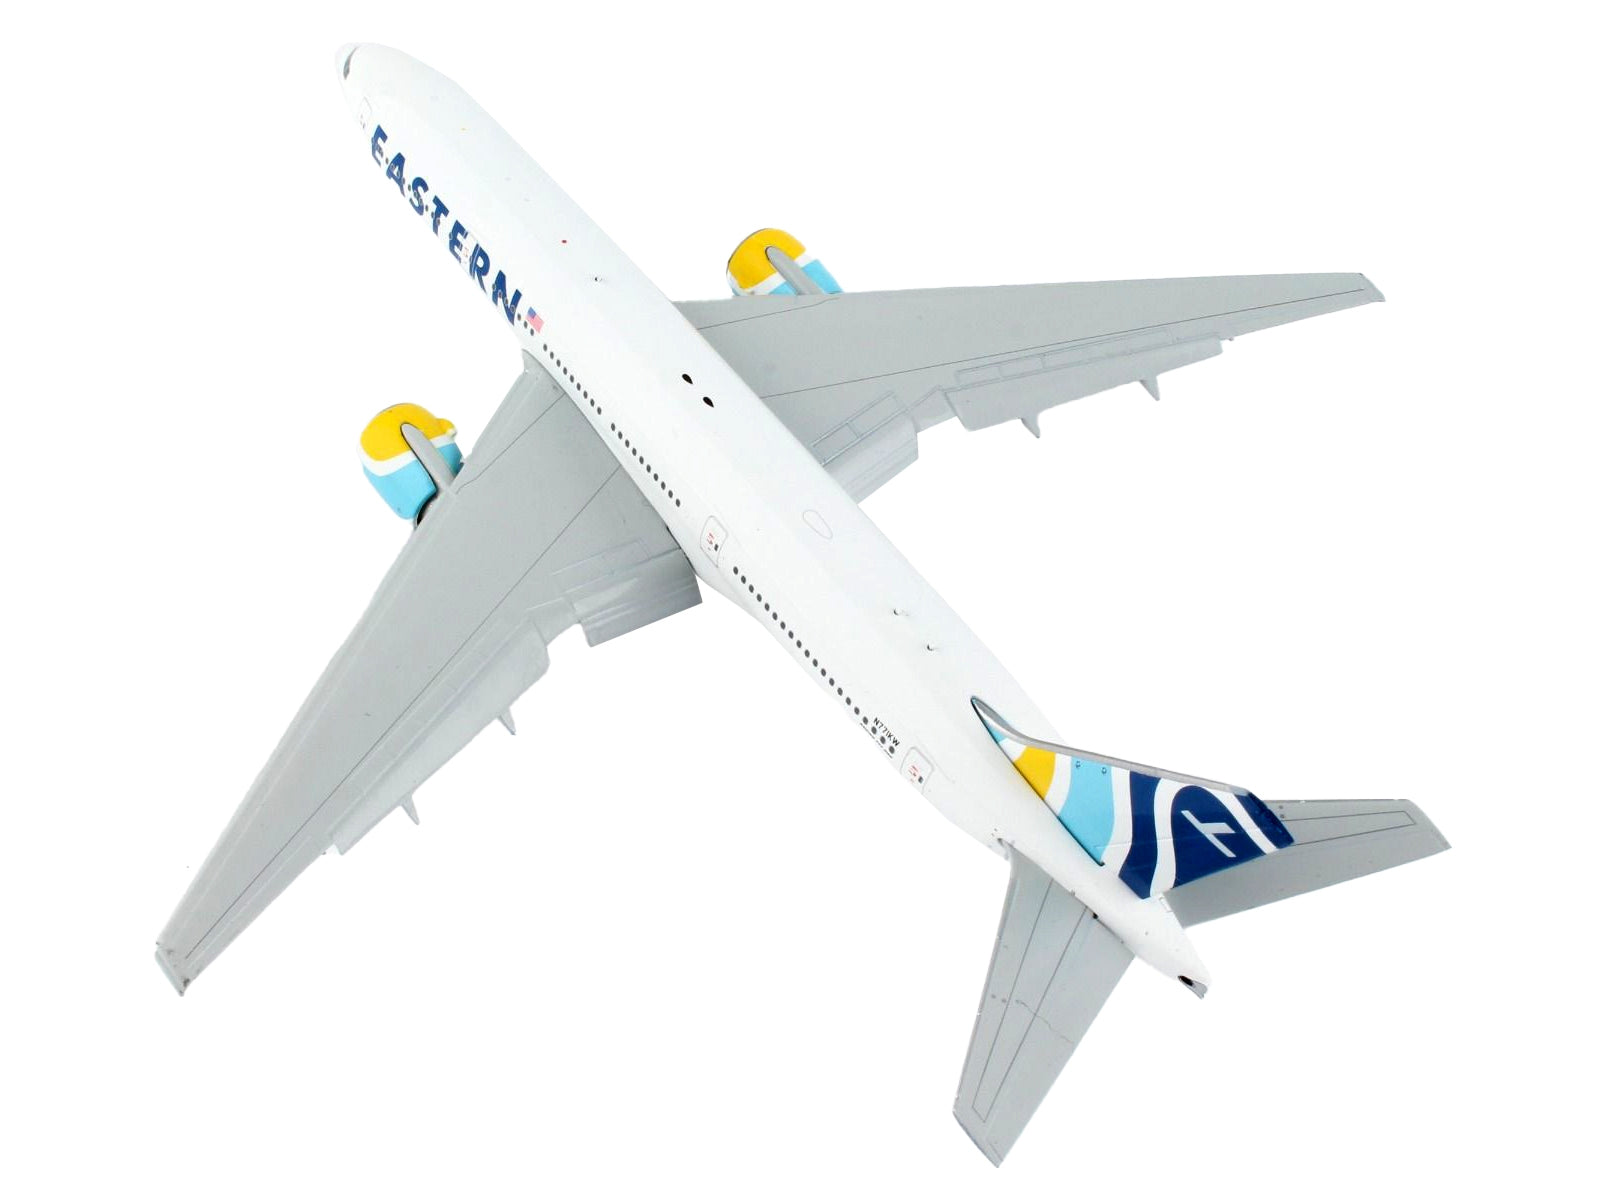 Boeing 777-200ER Commercial Aircraft with Flaps Down "Eastern Air Lines" White with Striped Tail 1/400 Diecast Model Airplane by GeminiJets